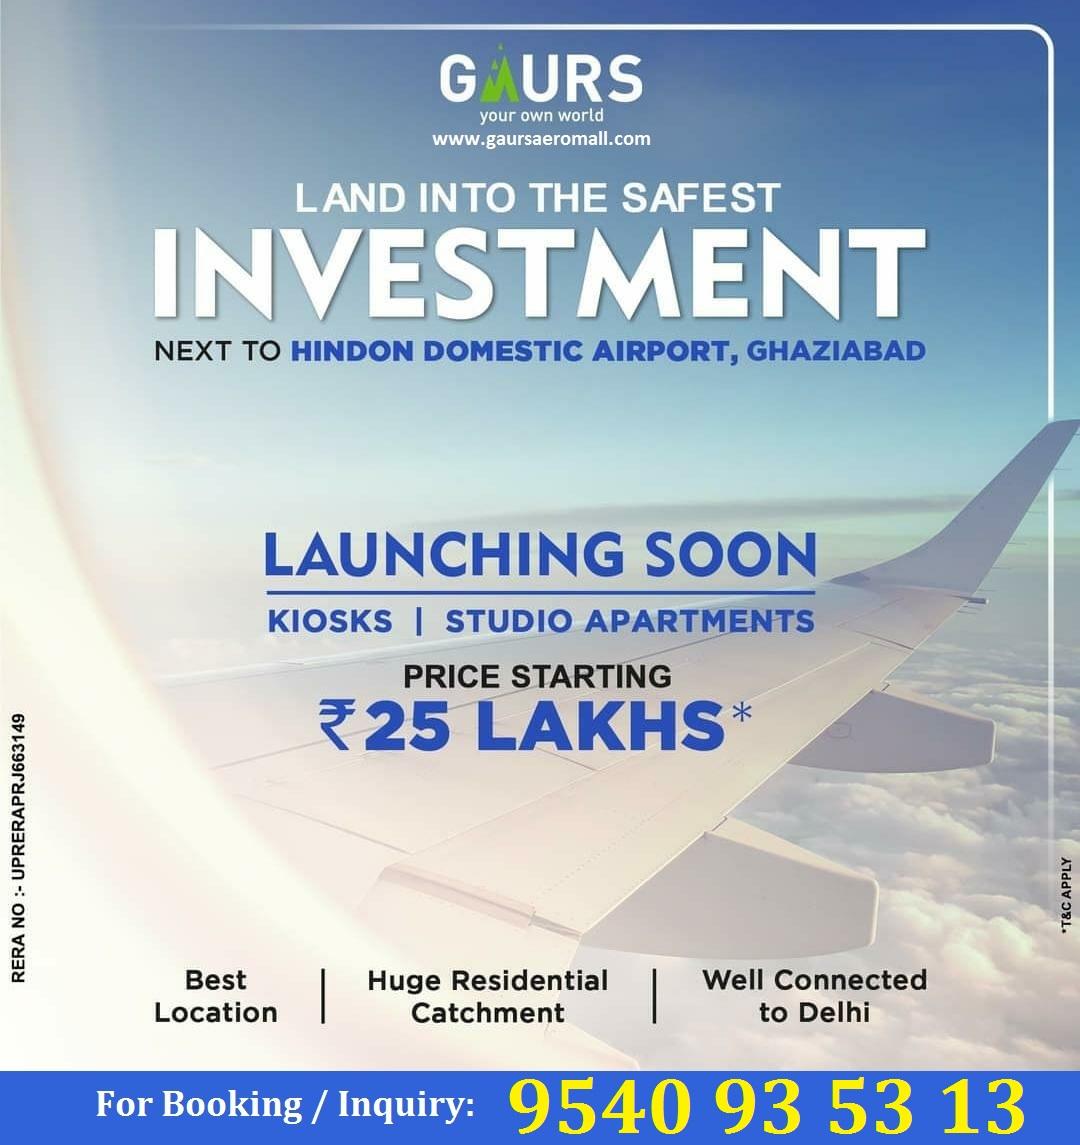 Gaur Aero Mall New Commercial Project Near Hindon Air Force Ghaziabad